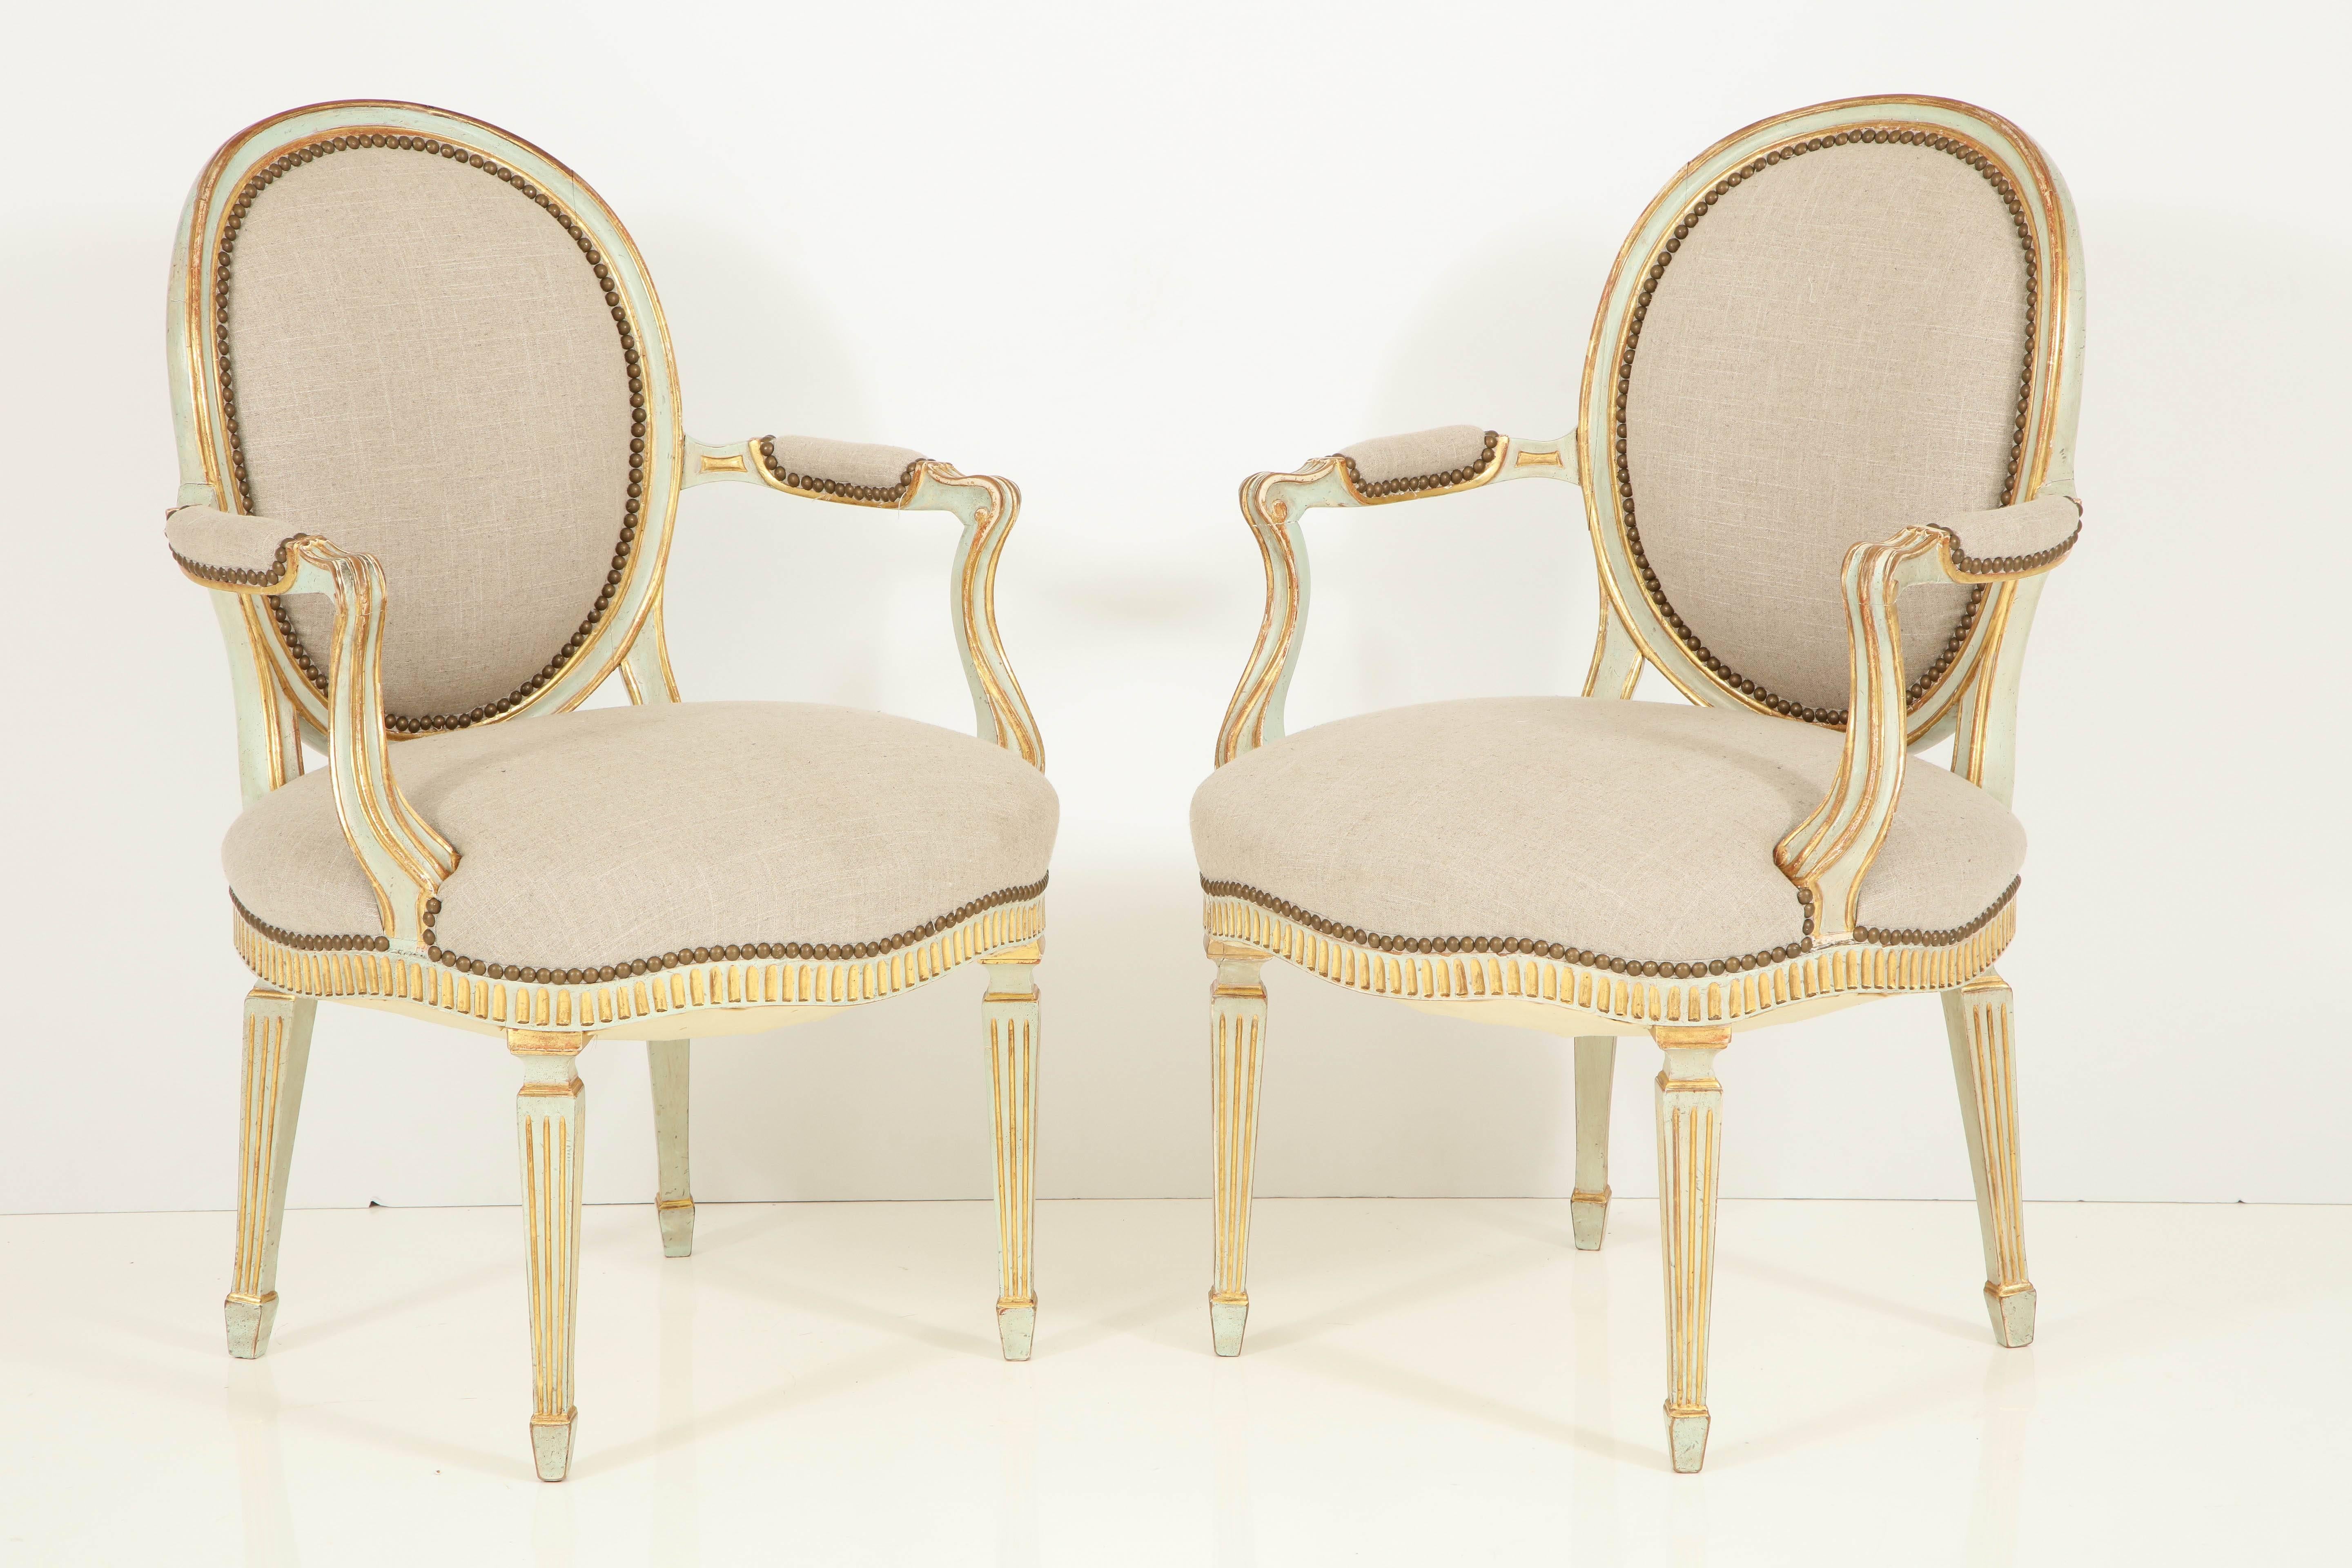 French Pair of Louis XVI Style Fauteuils